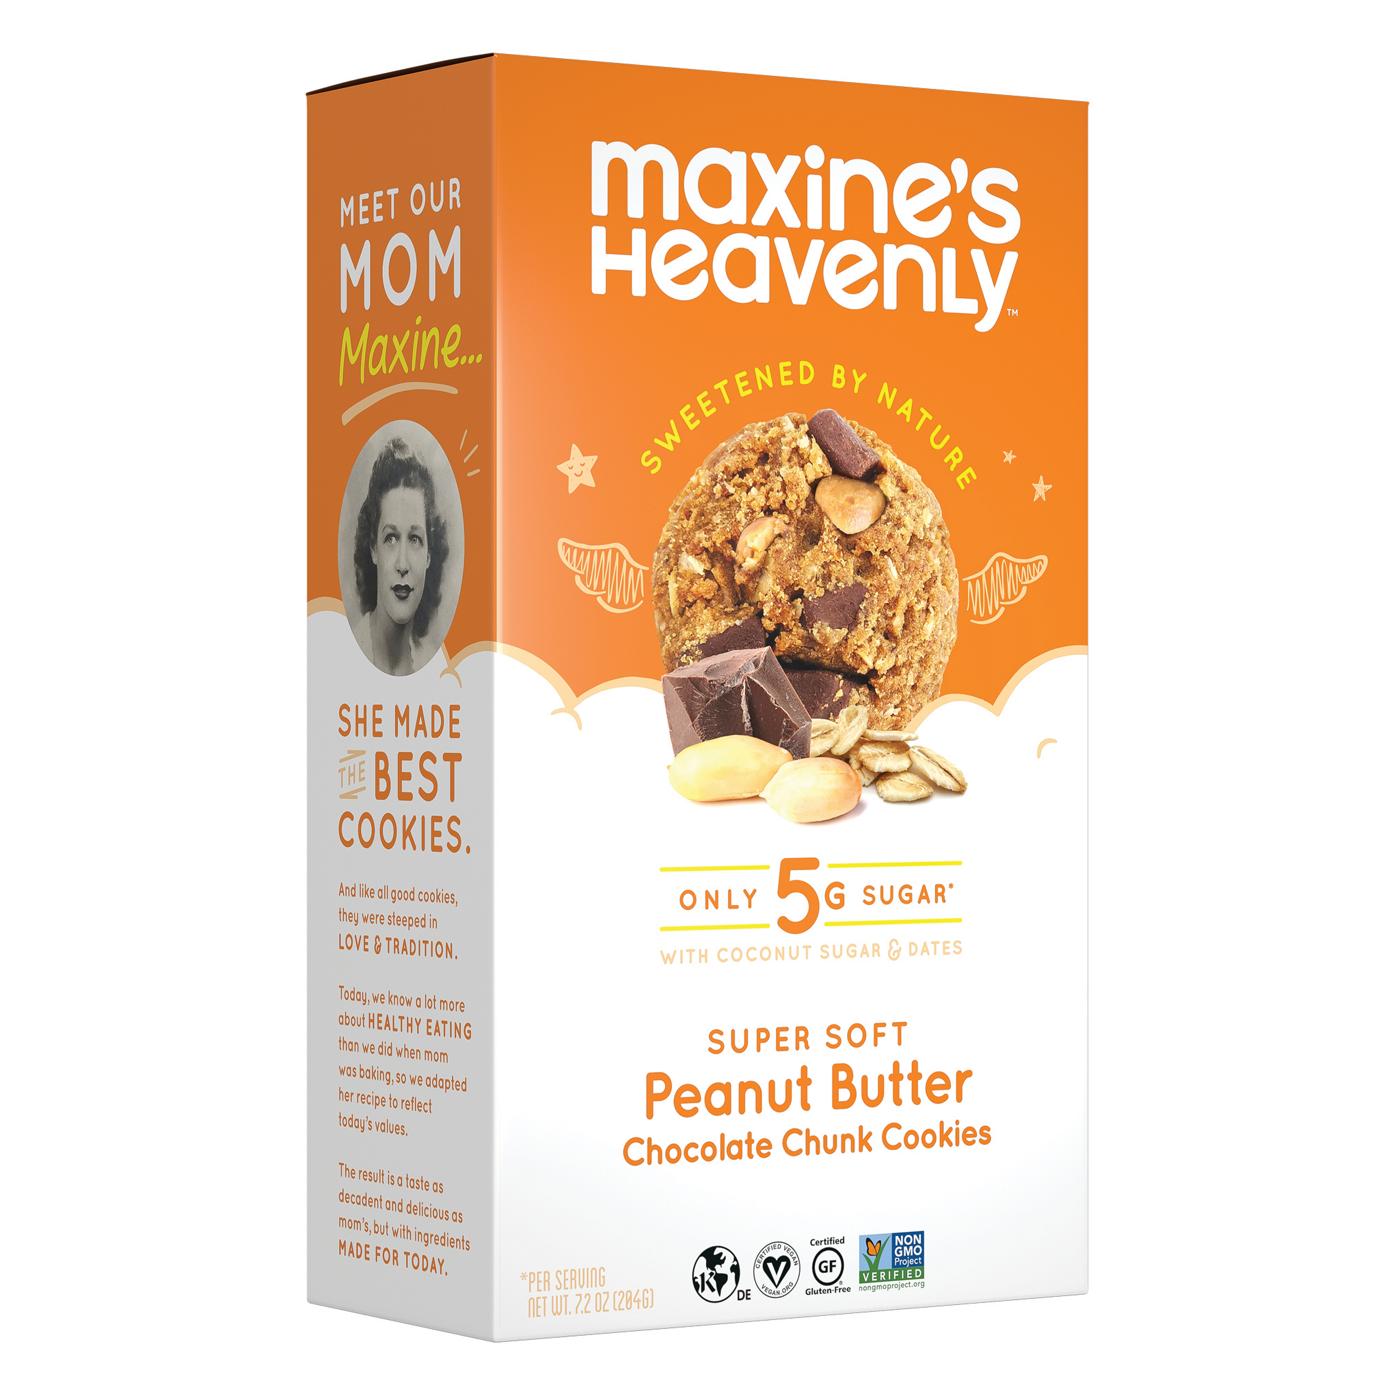 Maxine's Heavenly Peanut Butter Chocolate Chunk Cookies; image 1 of 6